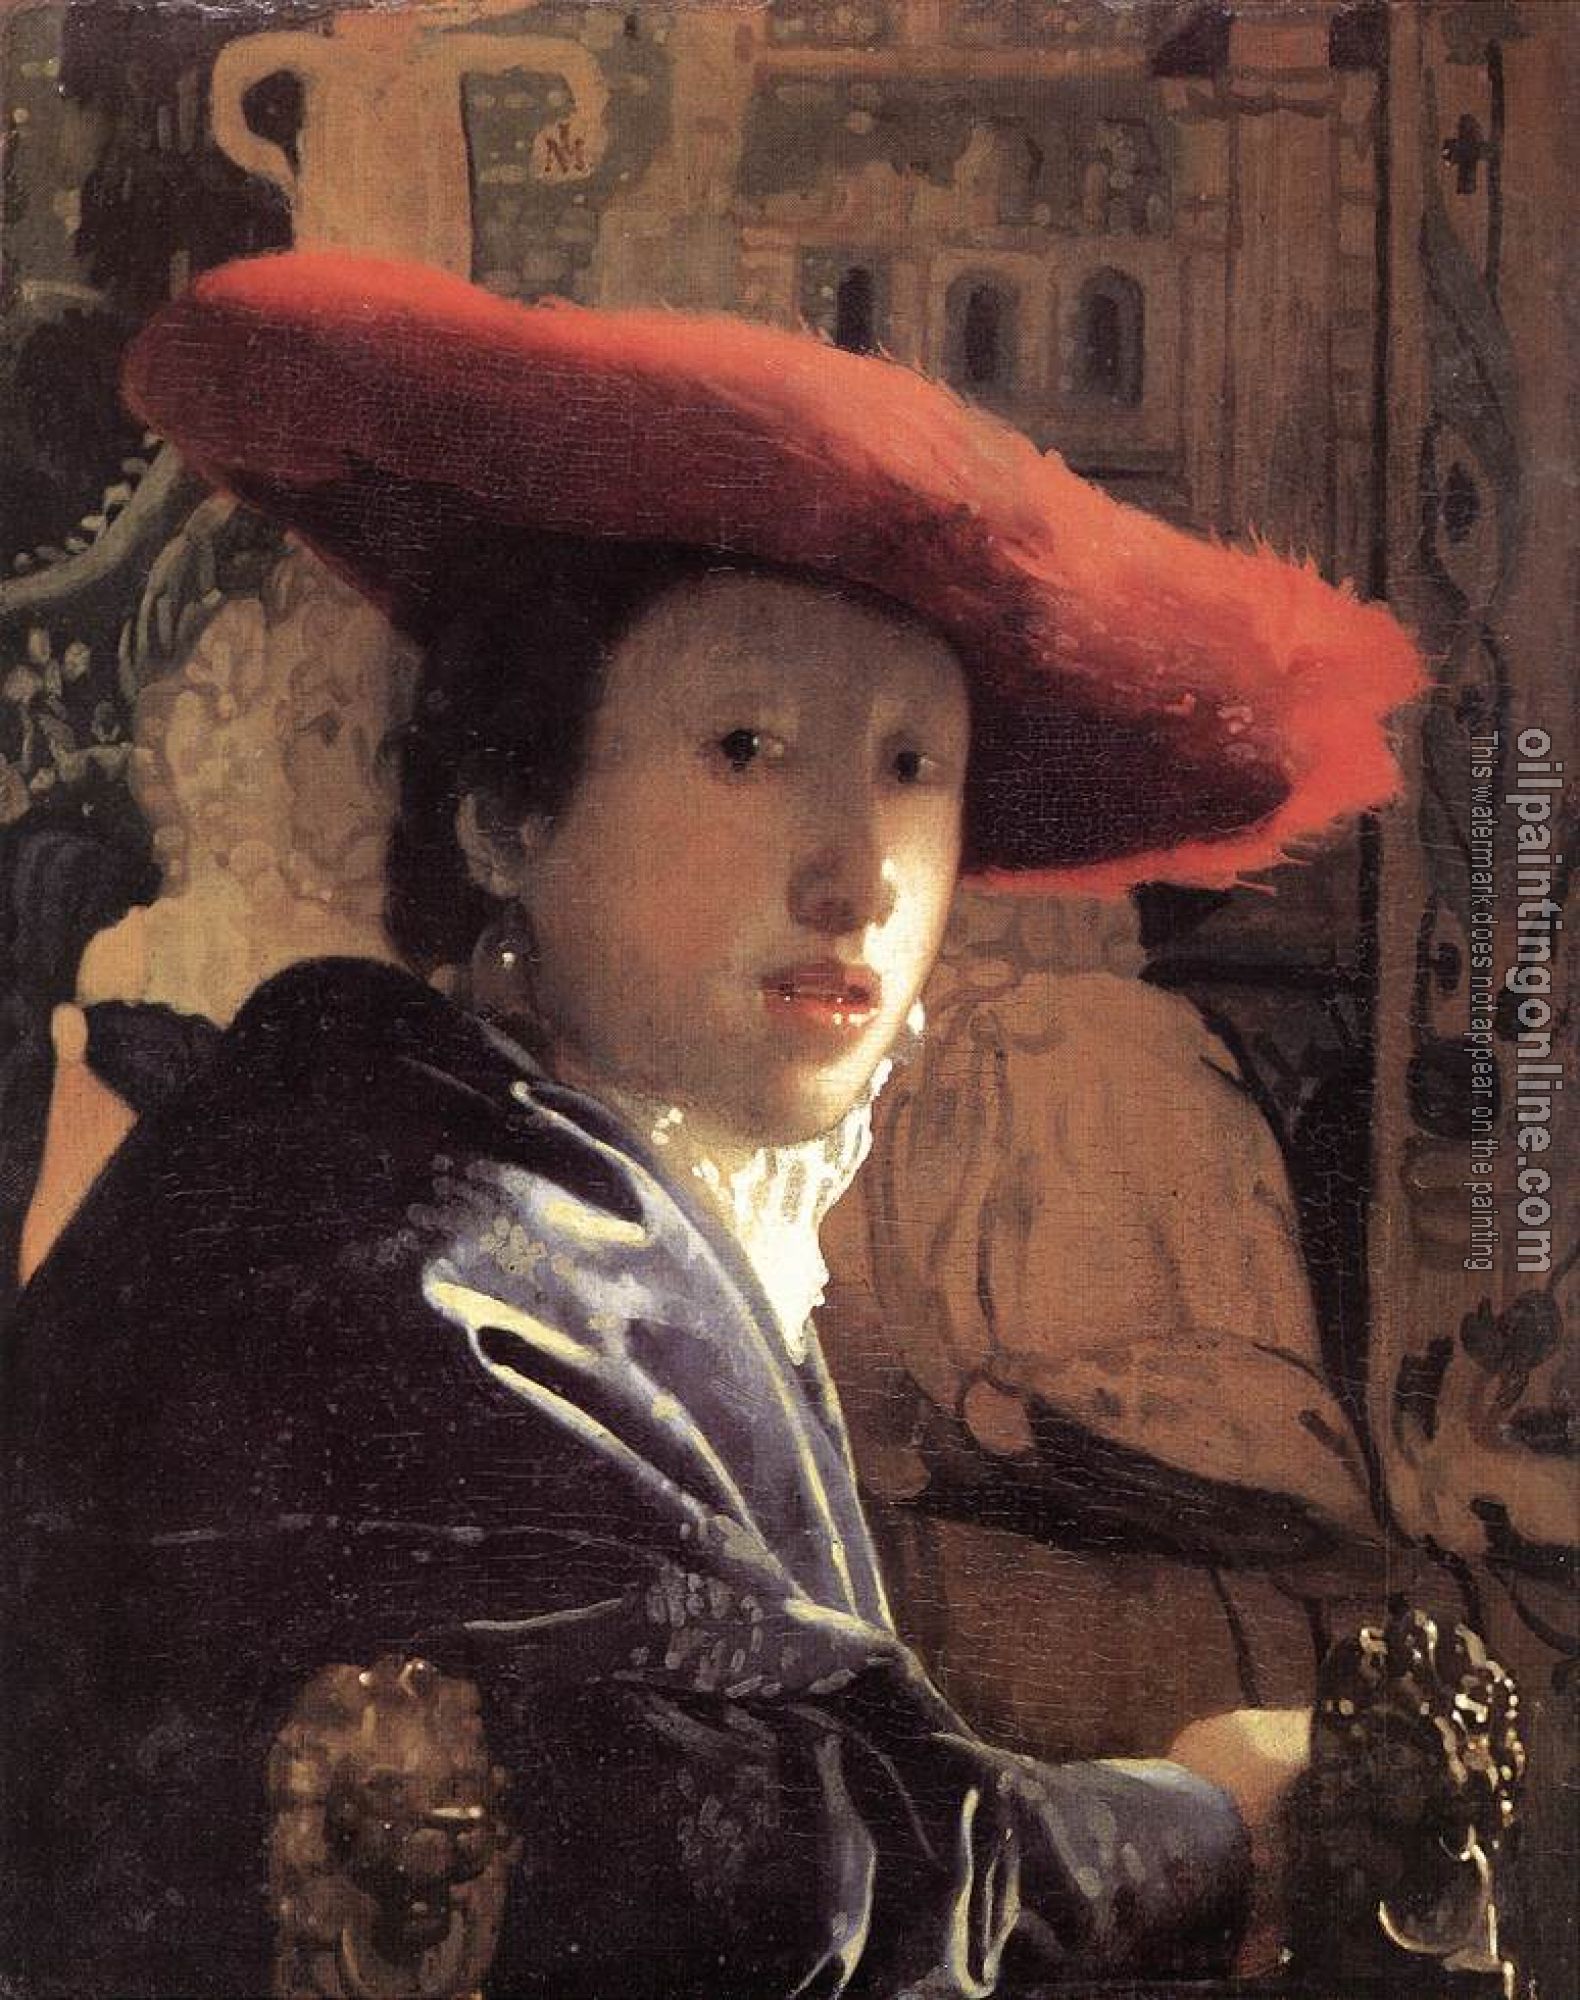 Vermeer, Jan - Girl with a Red Hat